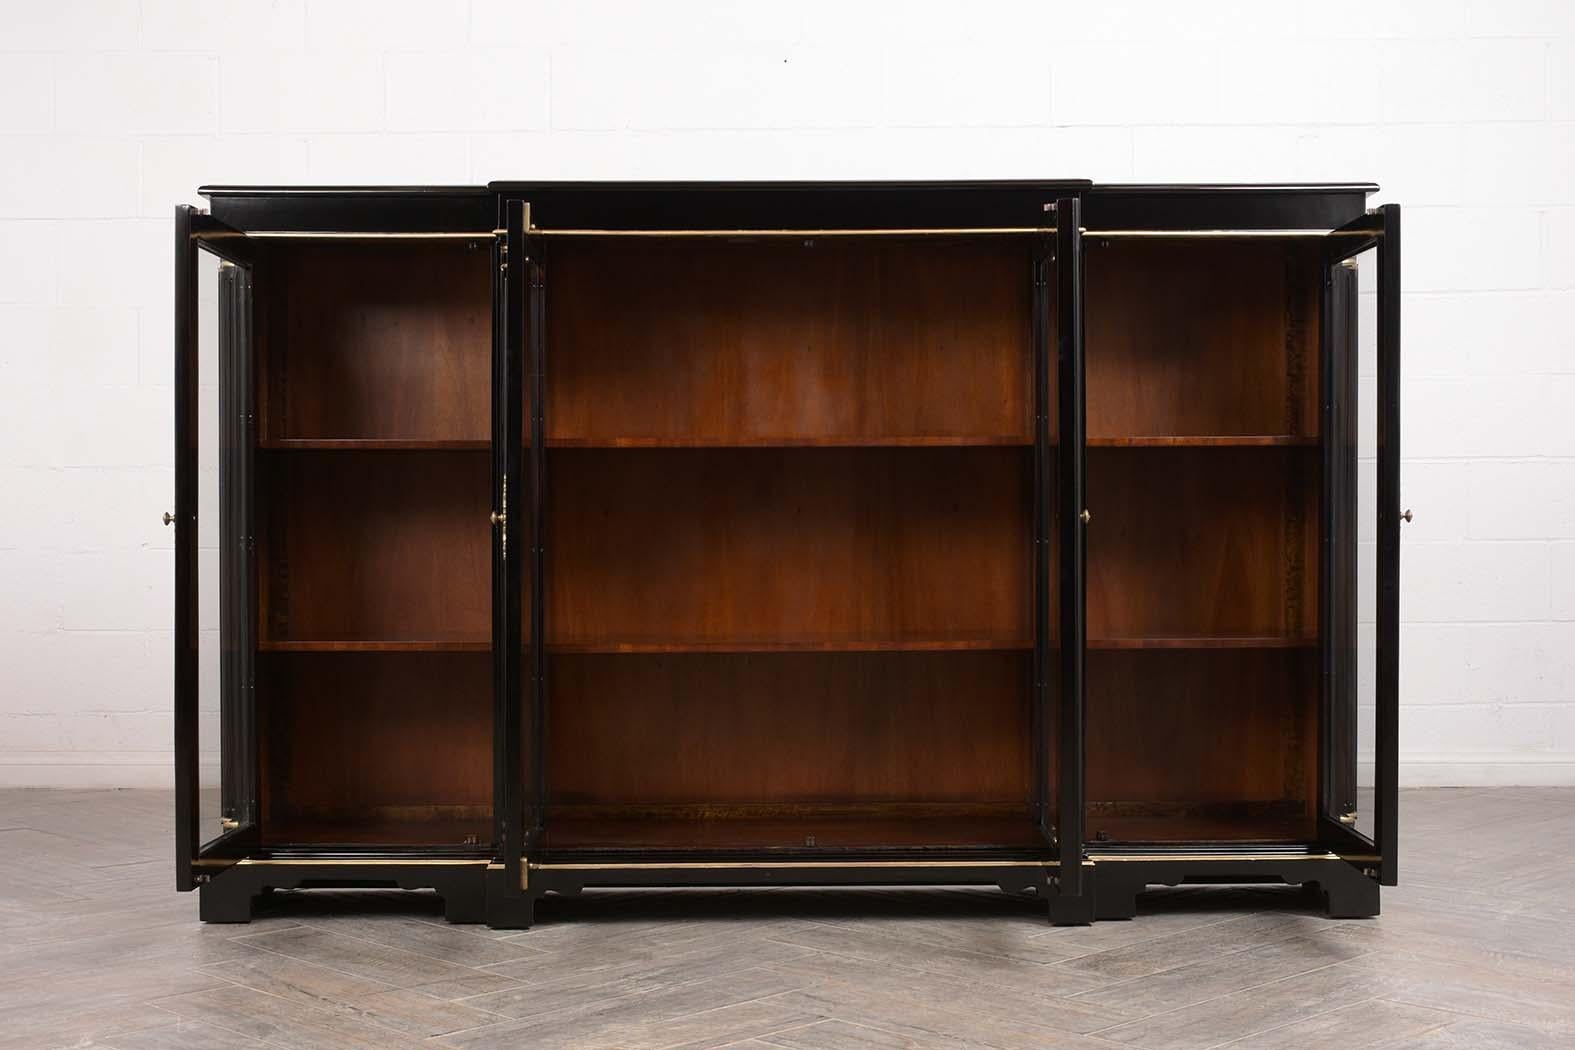 This Regency style mahogany wood four-door bookcase has been restored and finished in a black lacquered color. This bookcase features four doors with original glass, locks and key in working condition, and two interior adjustable wooden shelves. It